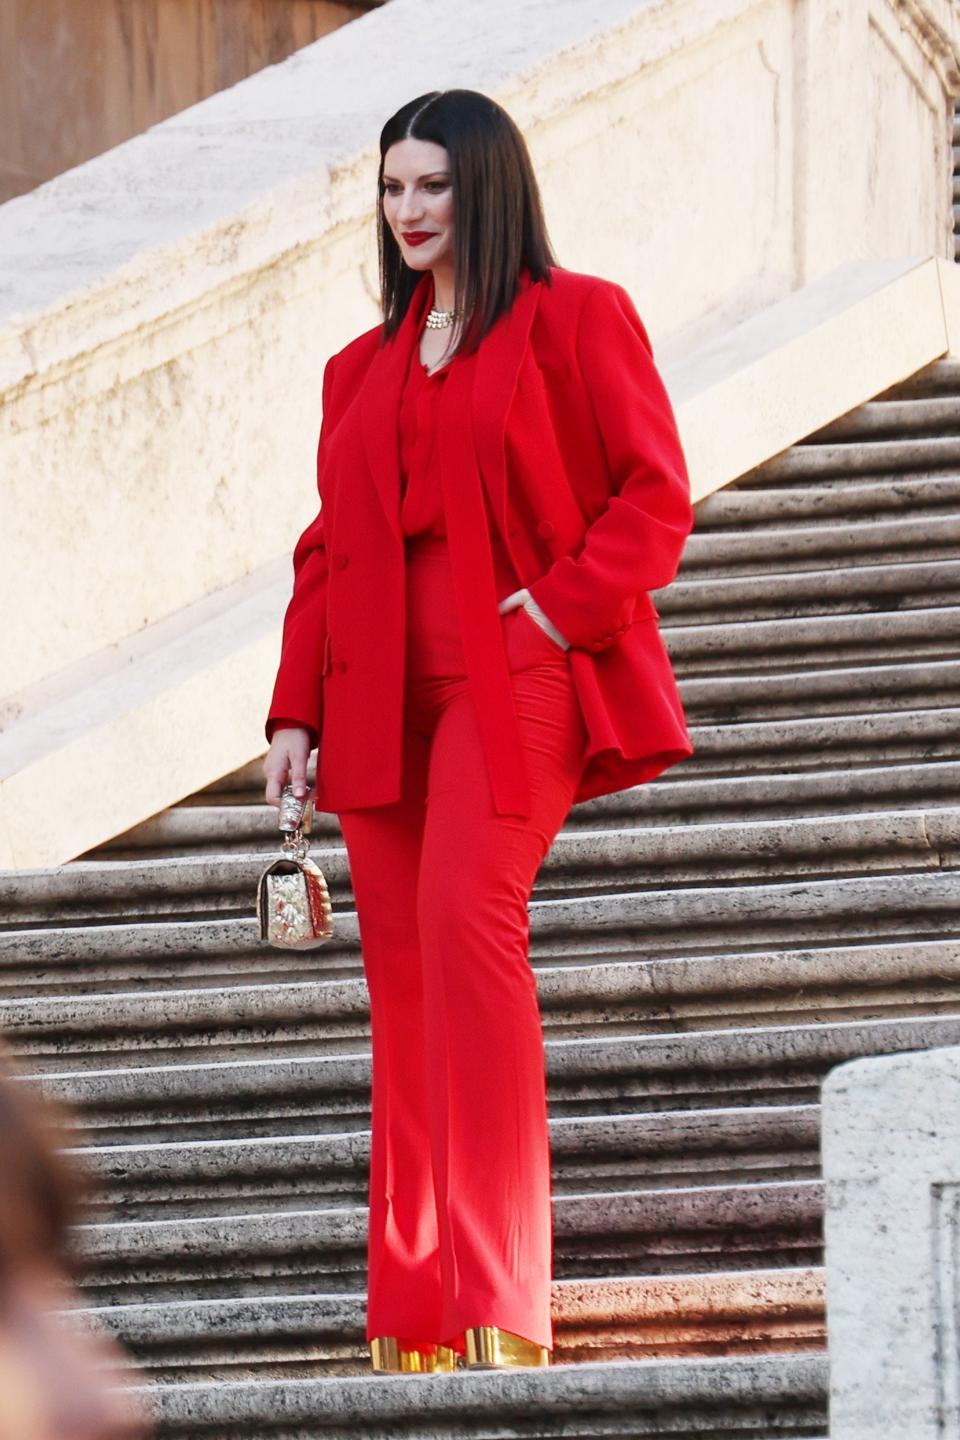 Laura Pausini posing for photos at the Valentino haute couture show in Rome, Italy.